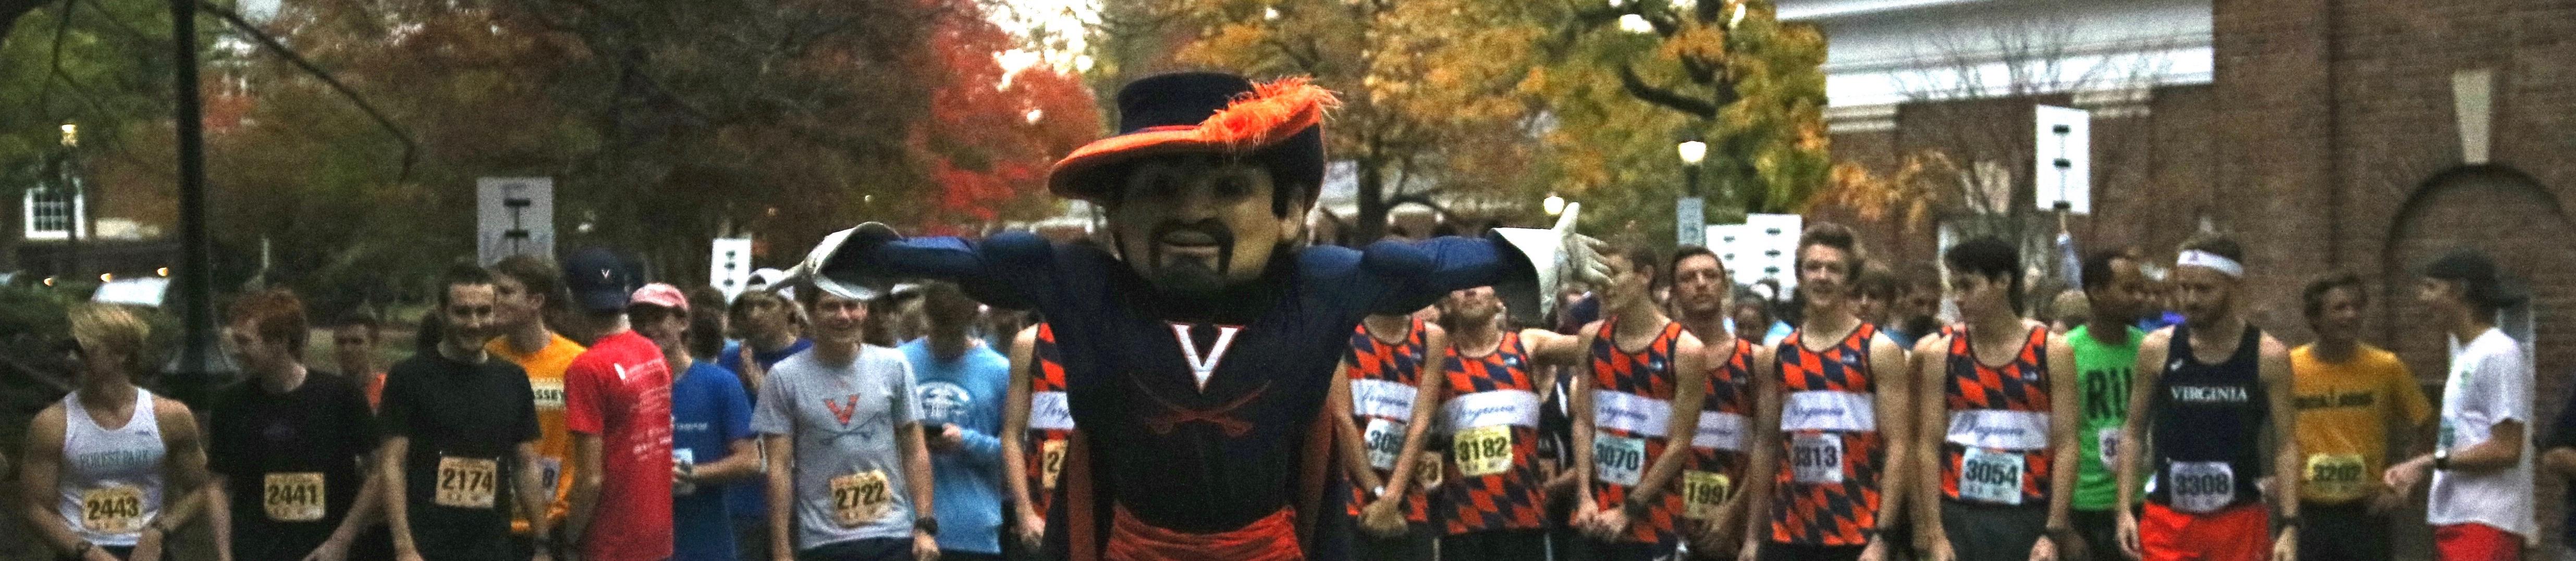 The UVA Cavaliers mascot stands in front of the starting line of the 4th Year 5k, runners are lined up behind him.